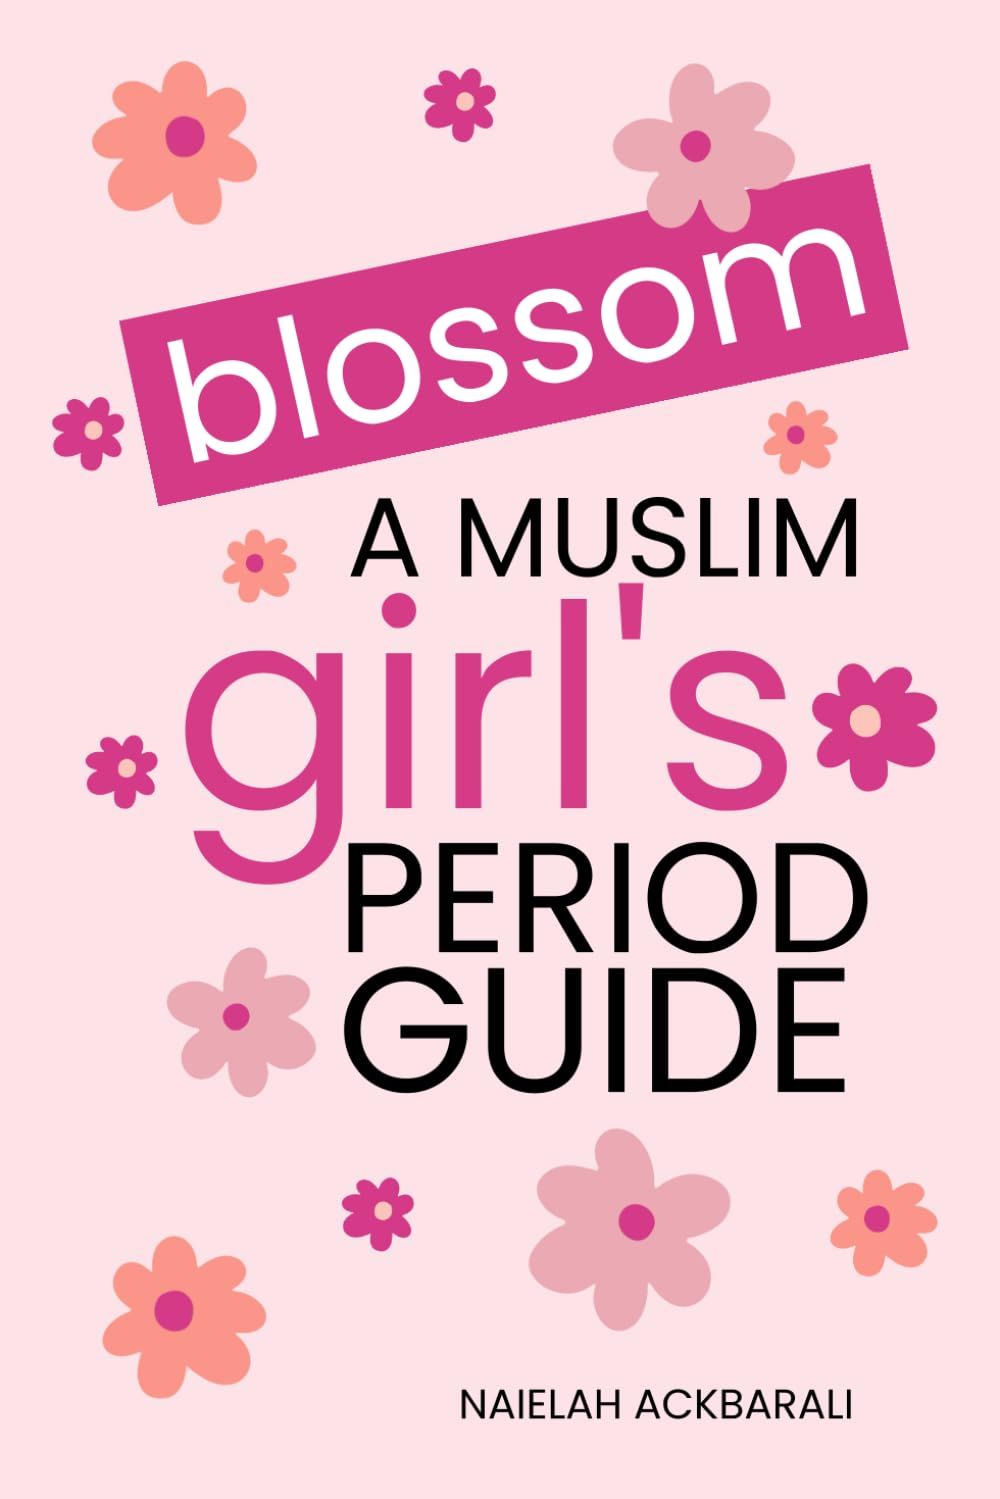 Blossom: A Muslim Girl’s Puberty Guide